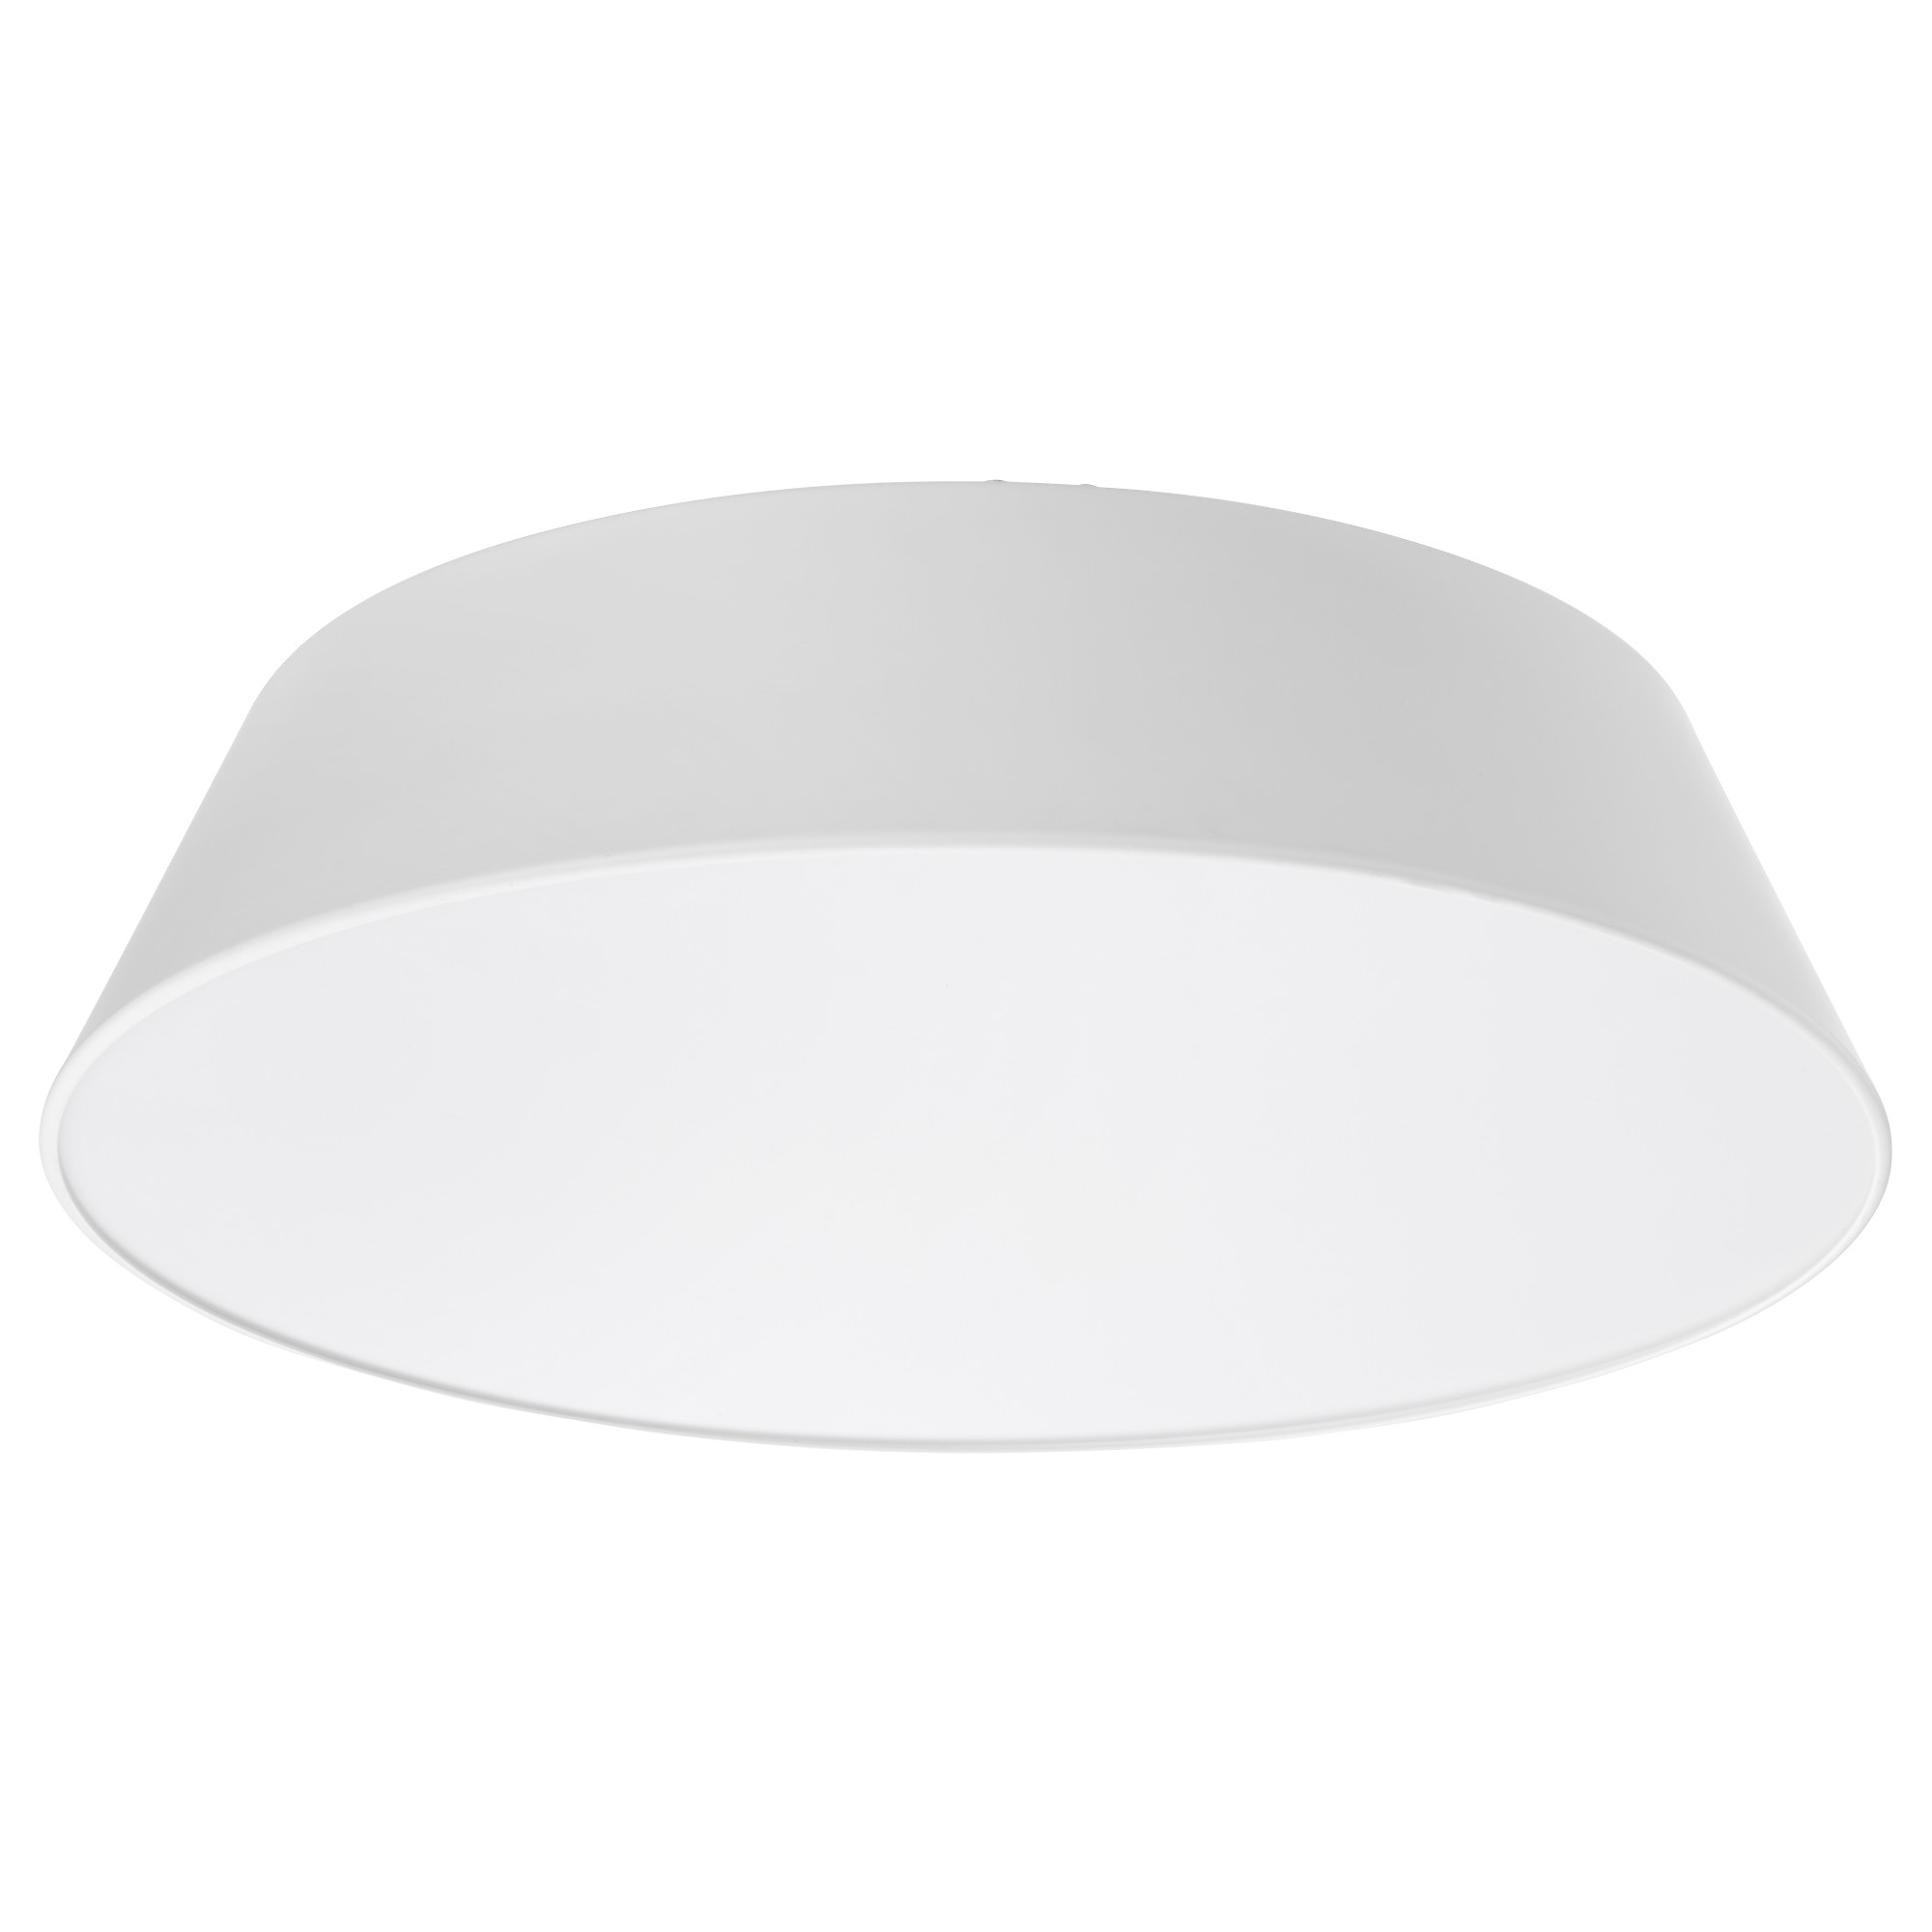 ceiling lamp inter ikea systems b.v. 2011 - 2016 | privacy policy. UFRRXNV